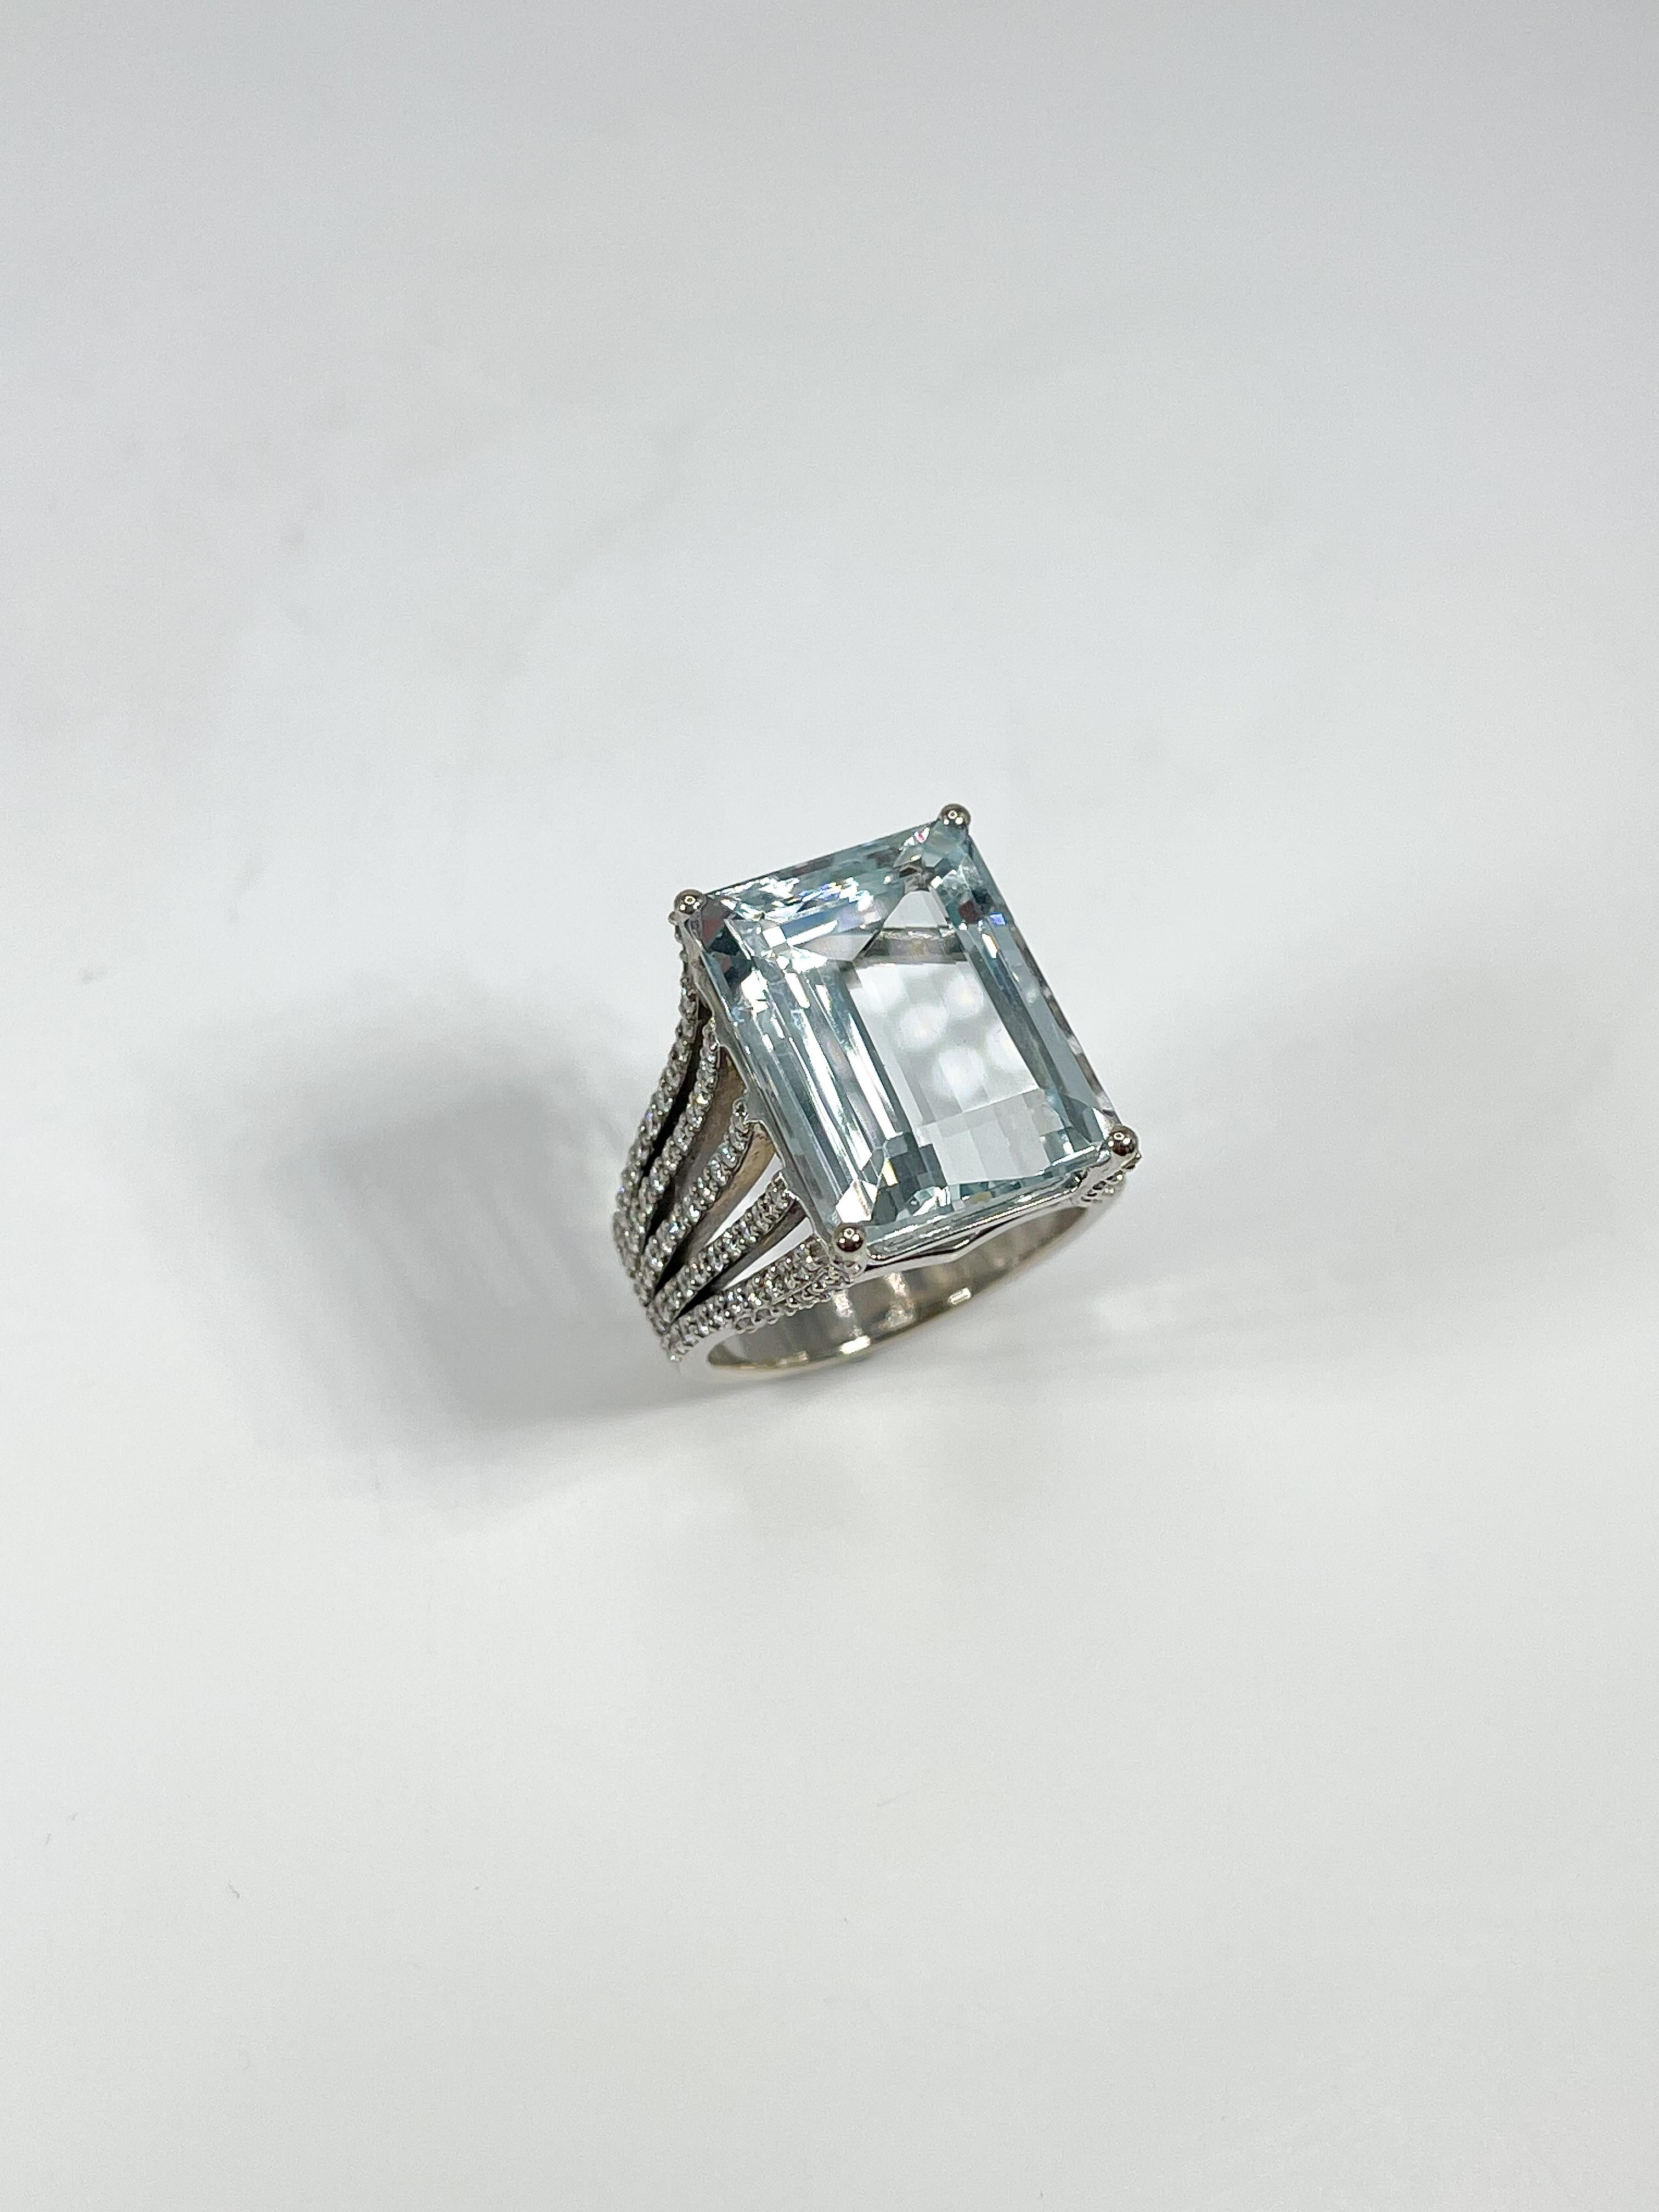 14k white gold fashion ring with 11 CTW emerald cut aquamarine center stone and 5 rows of diamond side stones 1.50 CTW. Center stone measures 16.3 x 12.2 mm. Ring is a size 7 and has a total weight of 10.9 grams. 